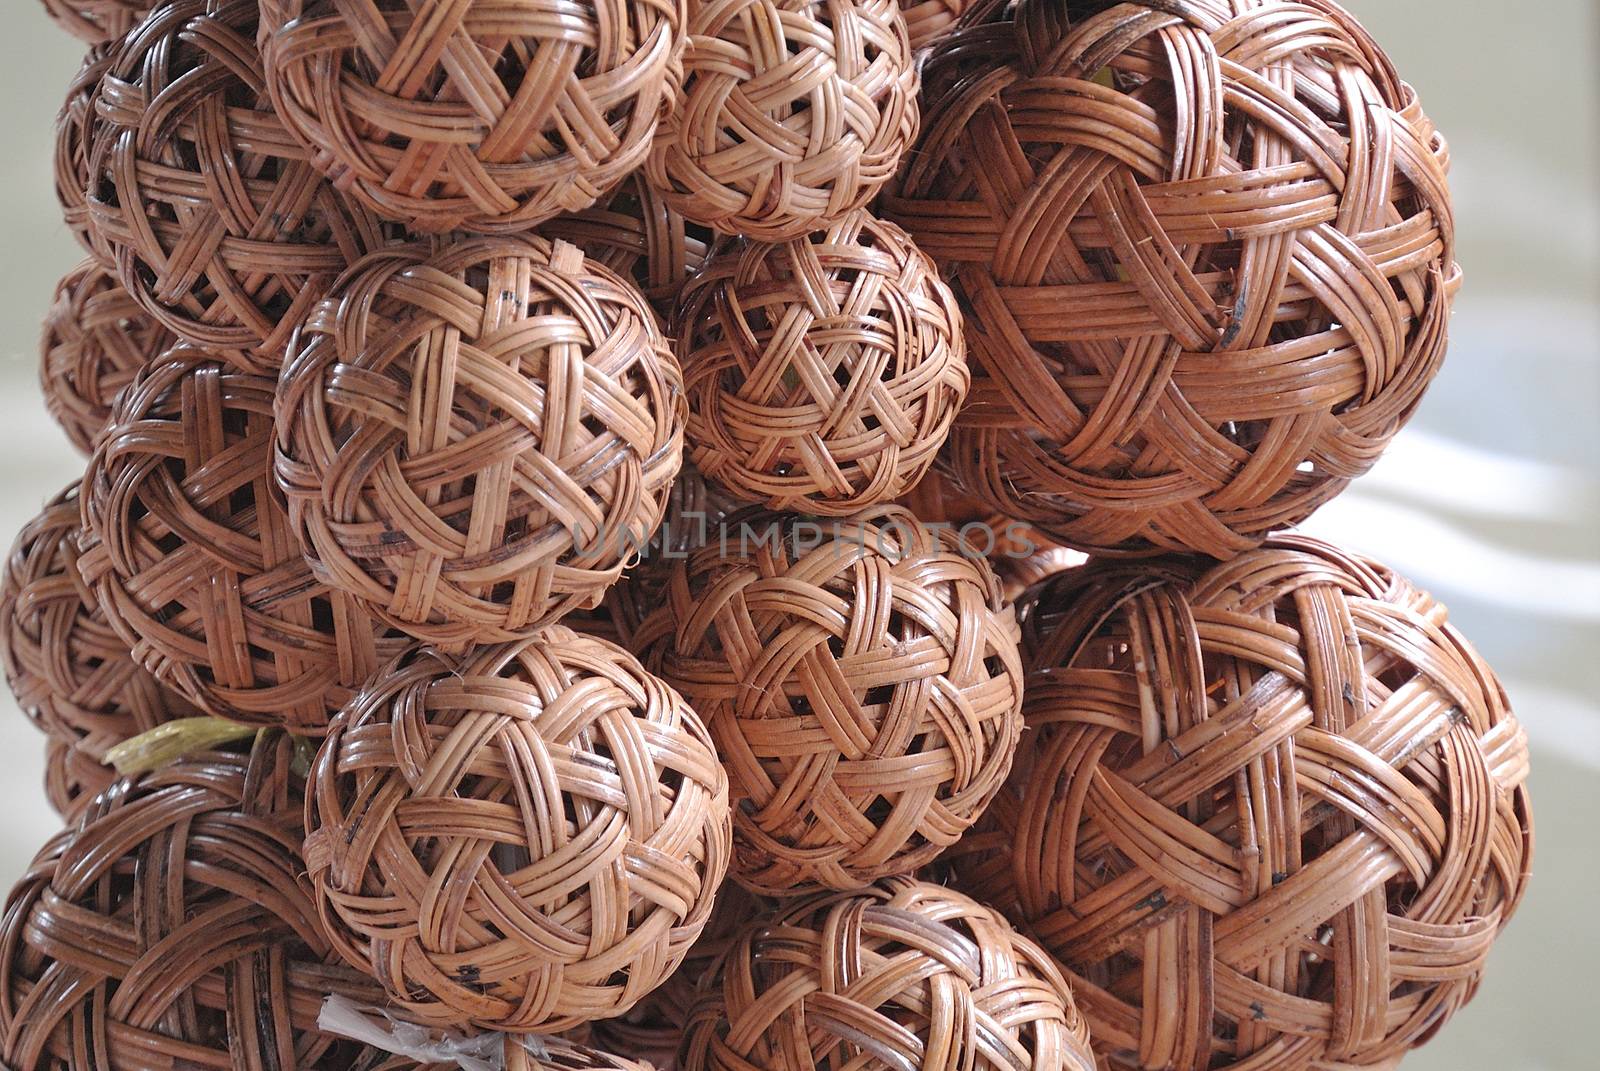 takraw balls on sale in floating market, THAILAND by think4photop